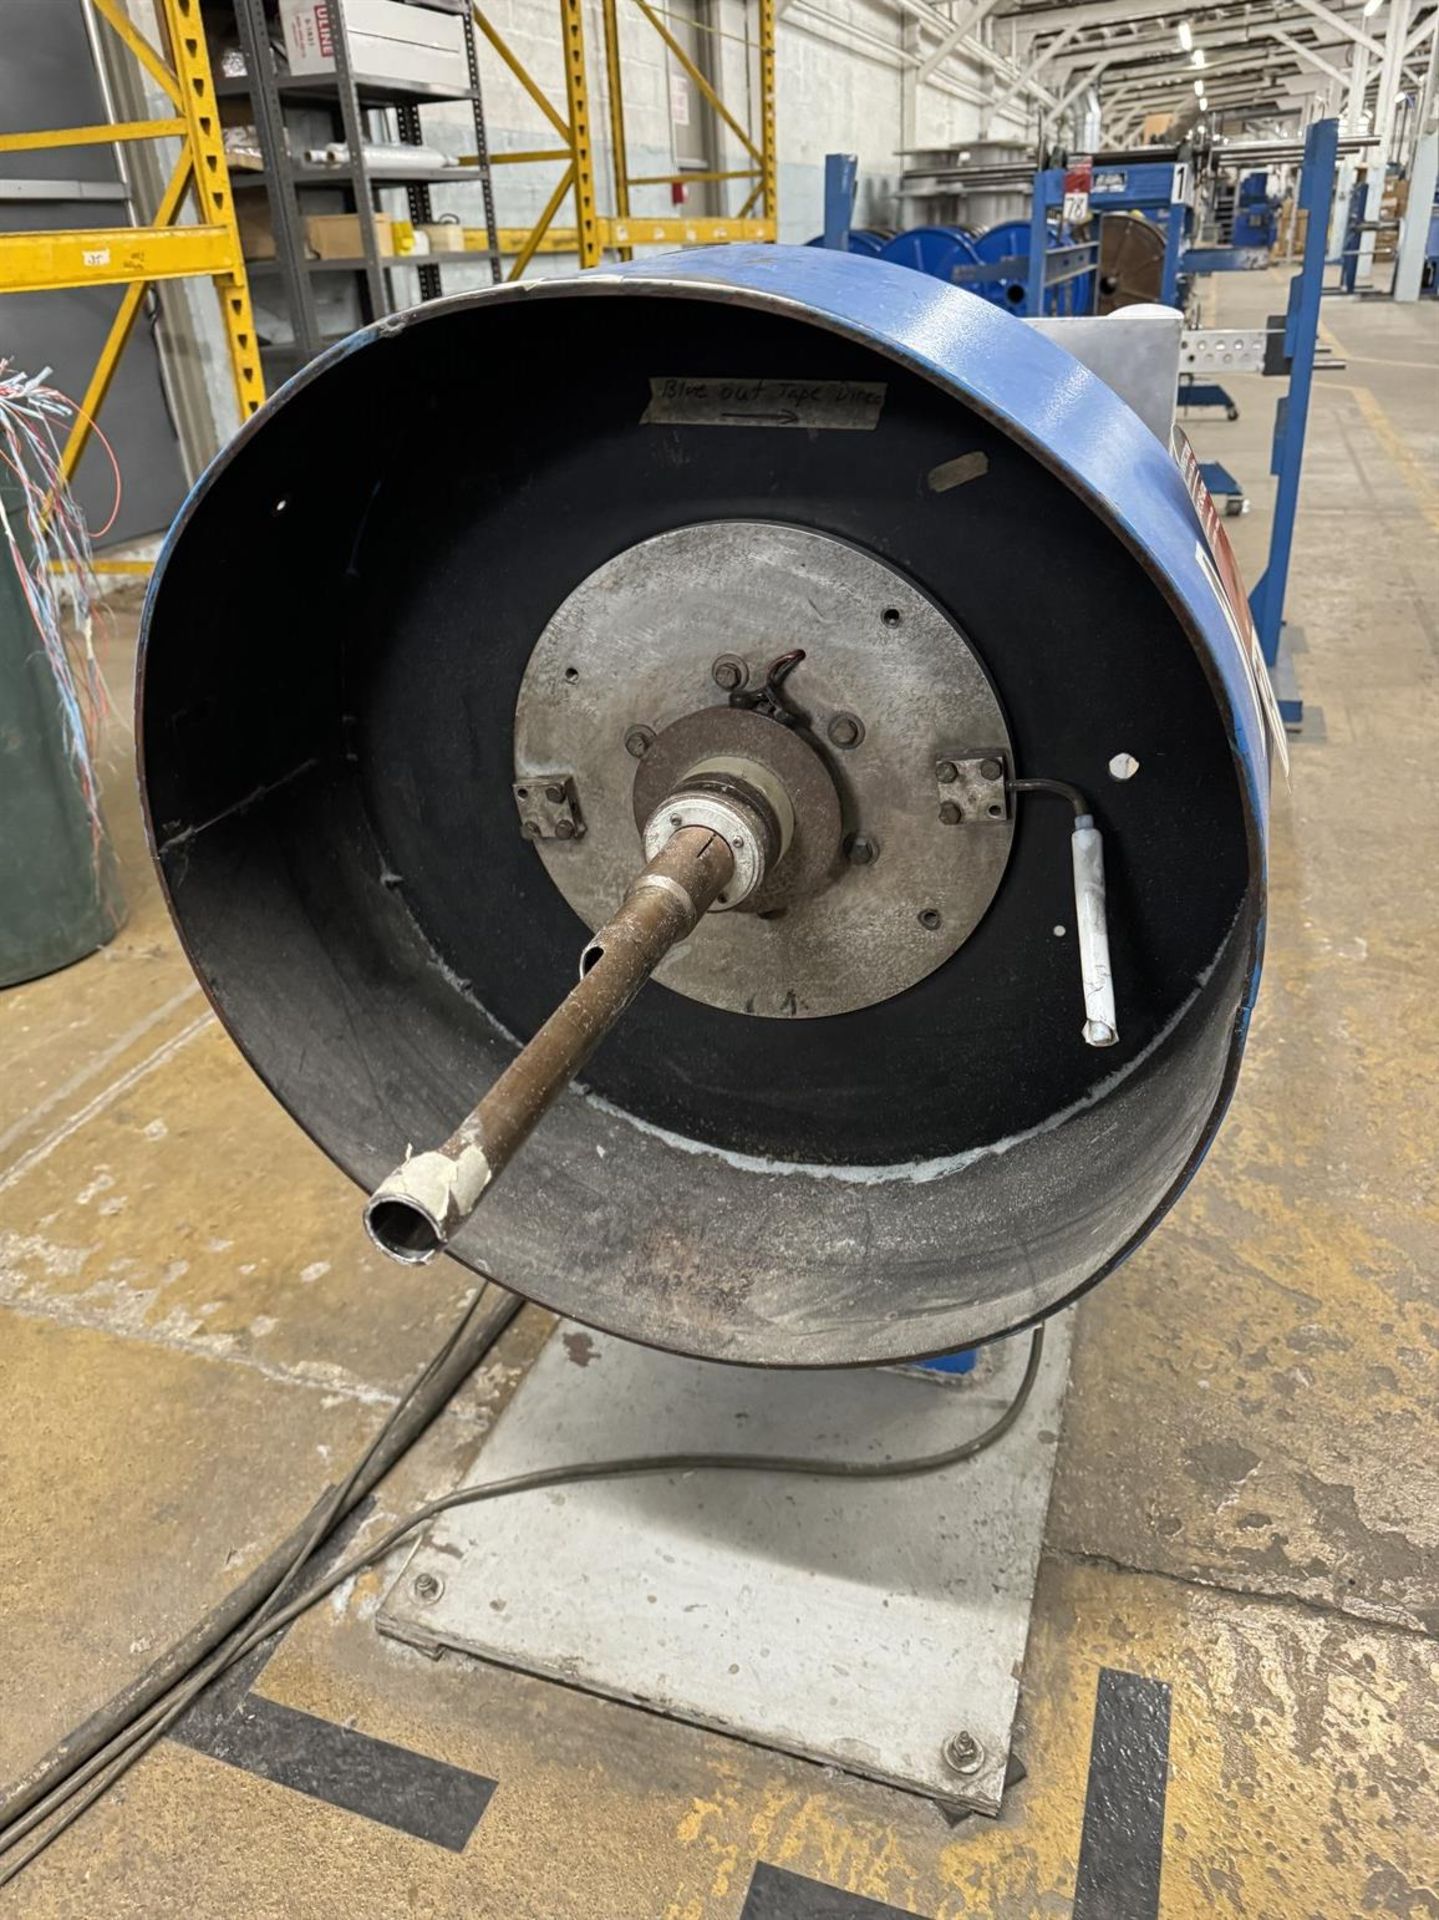 36” Rotating Cabler Line (#1)-10” Concentric Taping Head w/ 2HP BALDOR Motor - Image 2 of 3